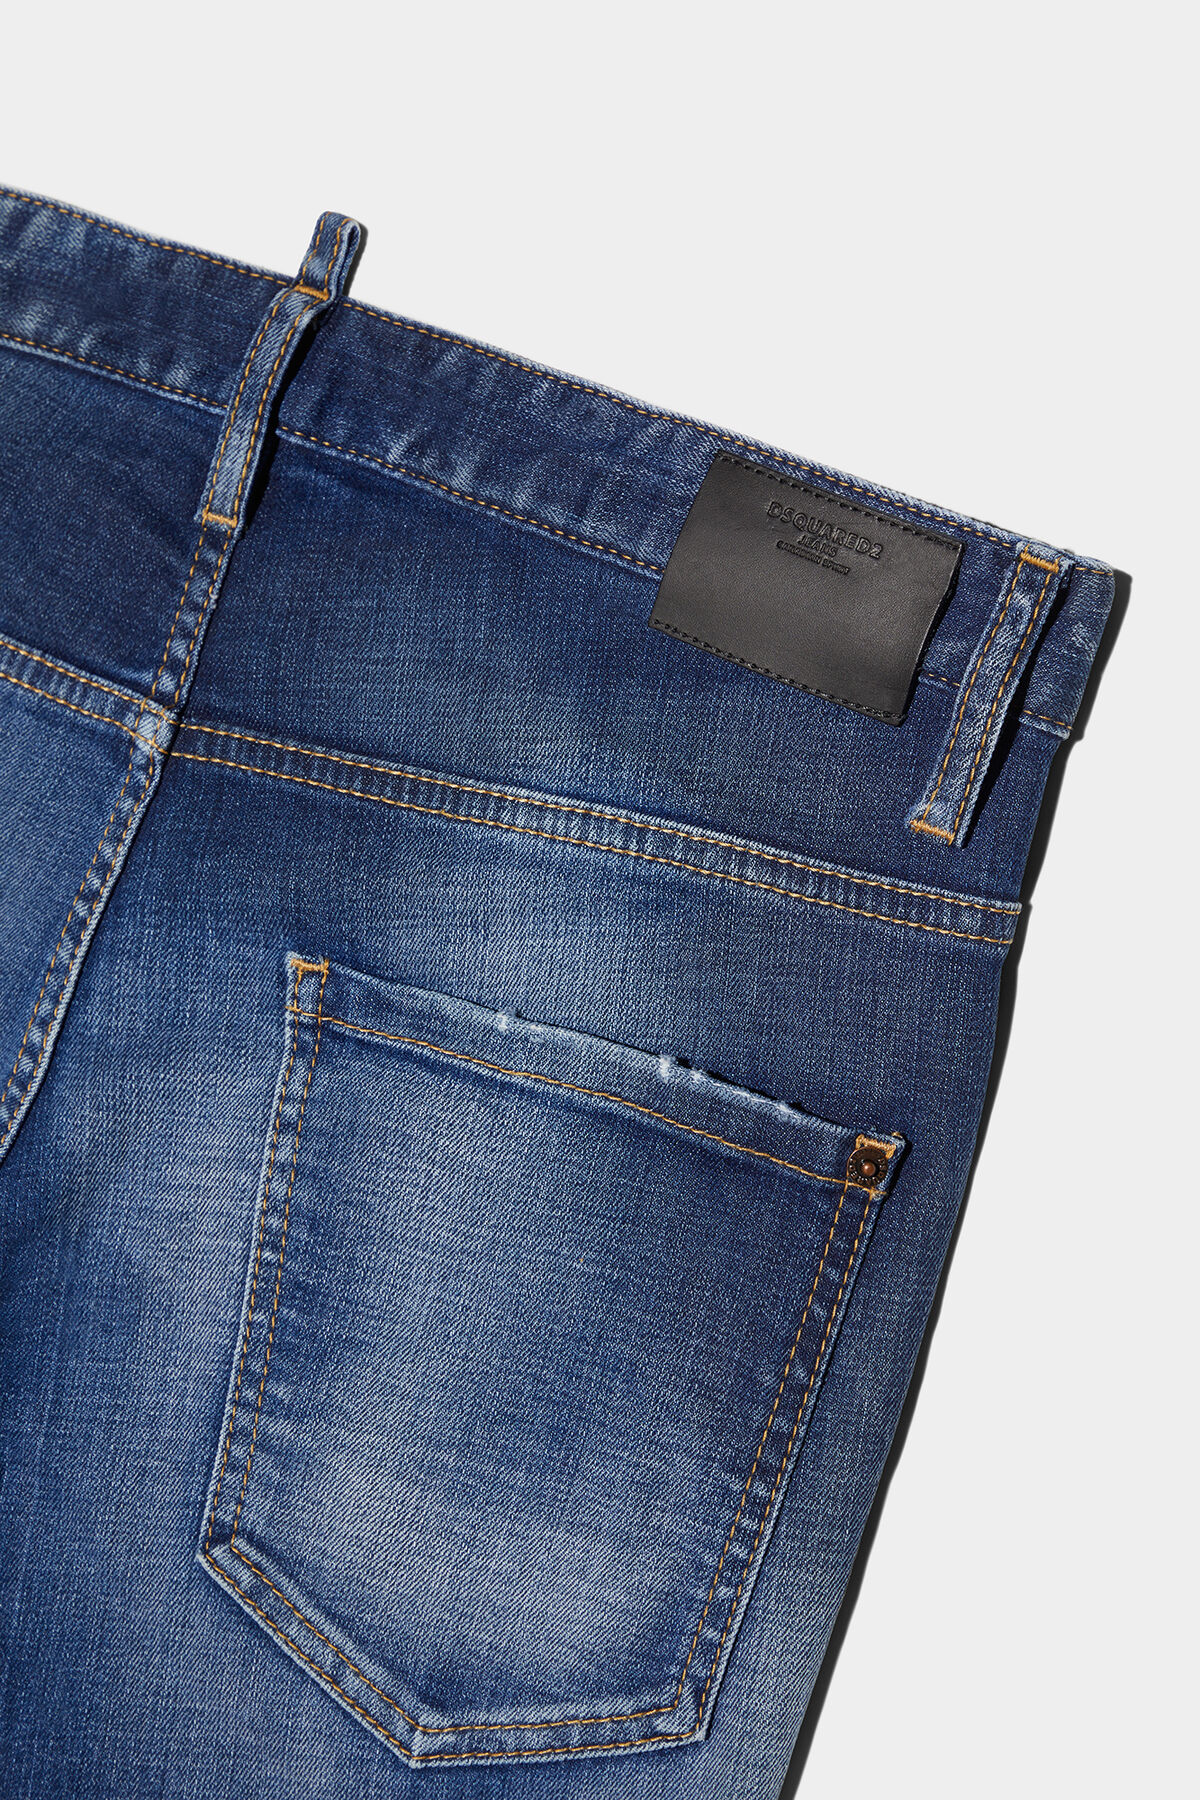 DSQUARED2 Jeans Skater in Washed Blue 46